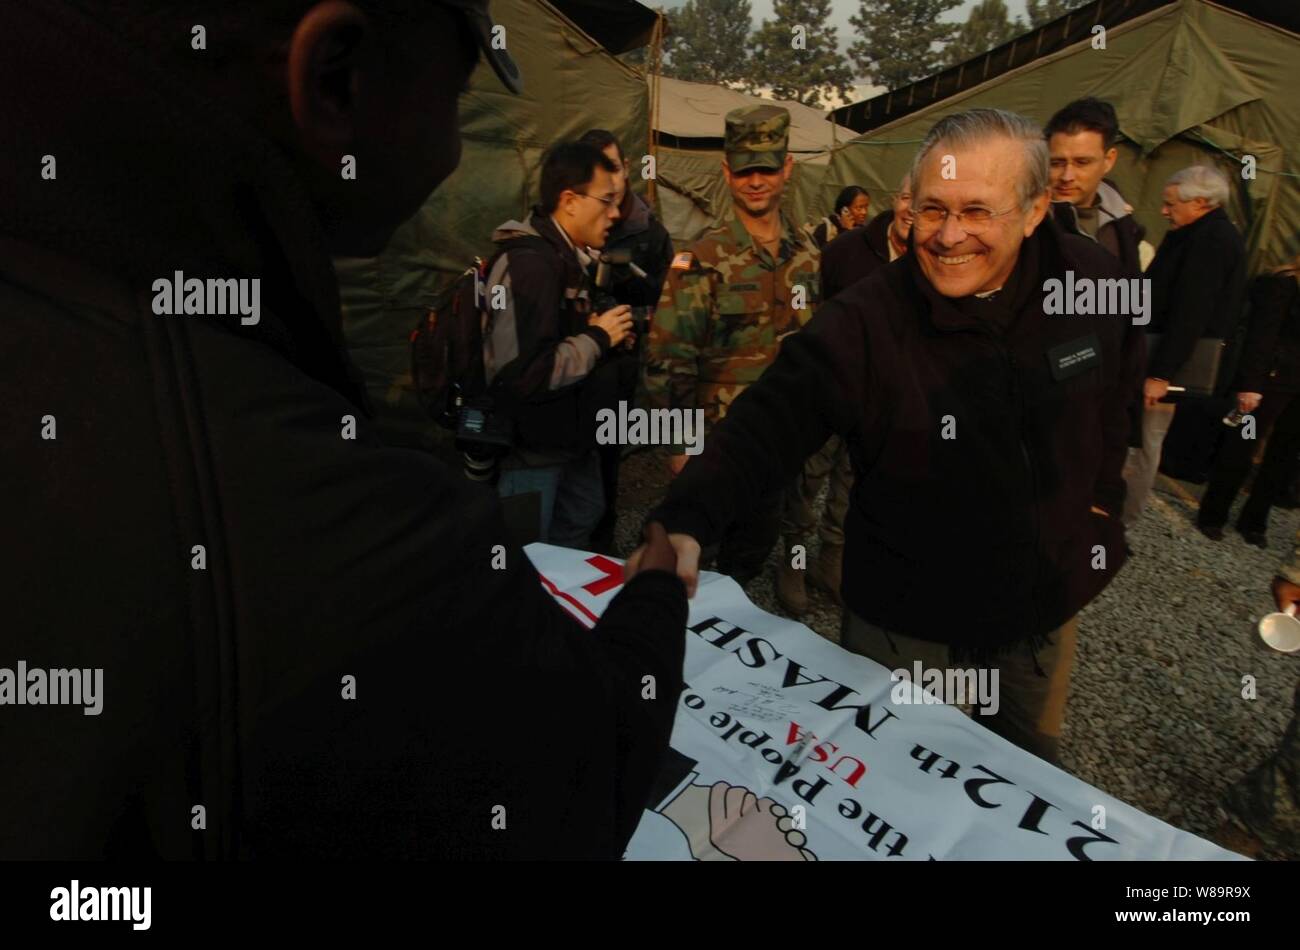 Secretary of Defense Donald H. Rumsfeld reaches out to shake a soldier's hand as he greets U.S. Army soldiers assigned to the 212th Mobile Army Surgical Hospital in Muzaffarabad, Pakistan, on Dec. 21, 2005.  Rumsfeld is visiting the areas damaged by the Oct. 8, 2005, earthquake and meeting with the U.S. personnel working to aid the survivors. Stock Photo